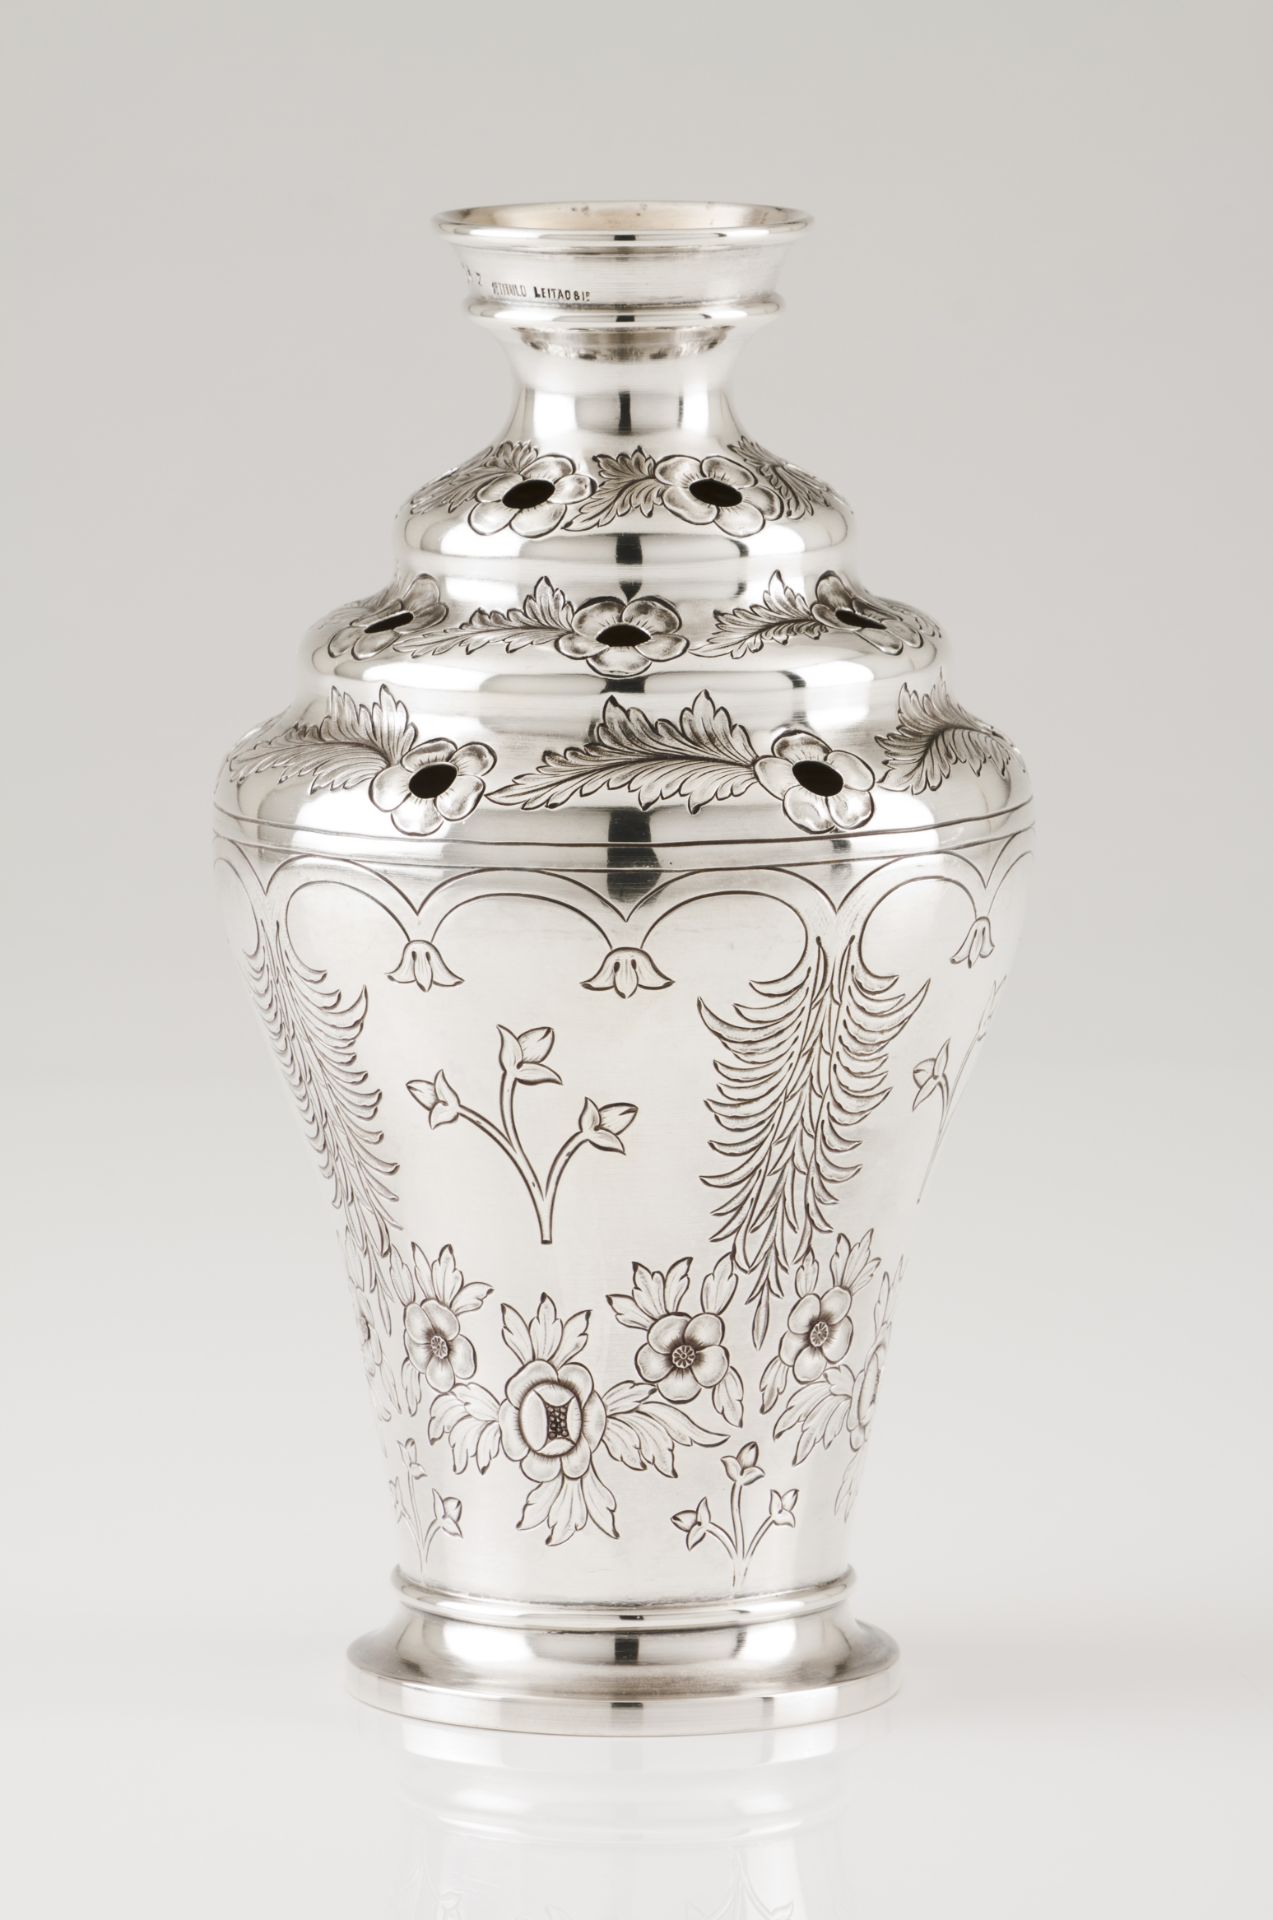 A vasePortuguese silver Fully engraved turned body of foliage motifs and various flower holding